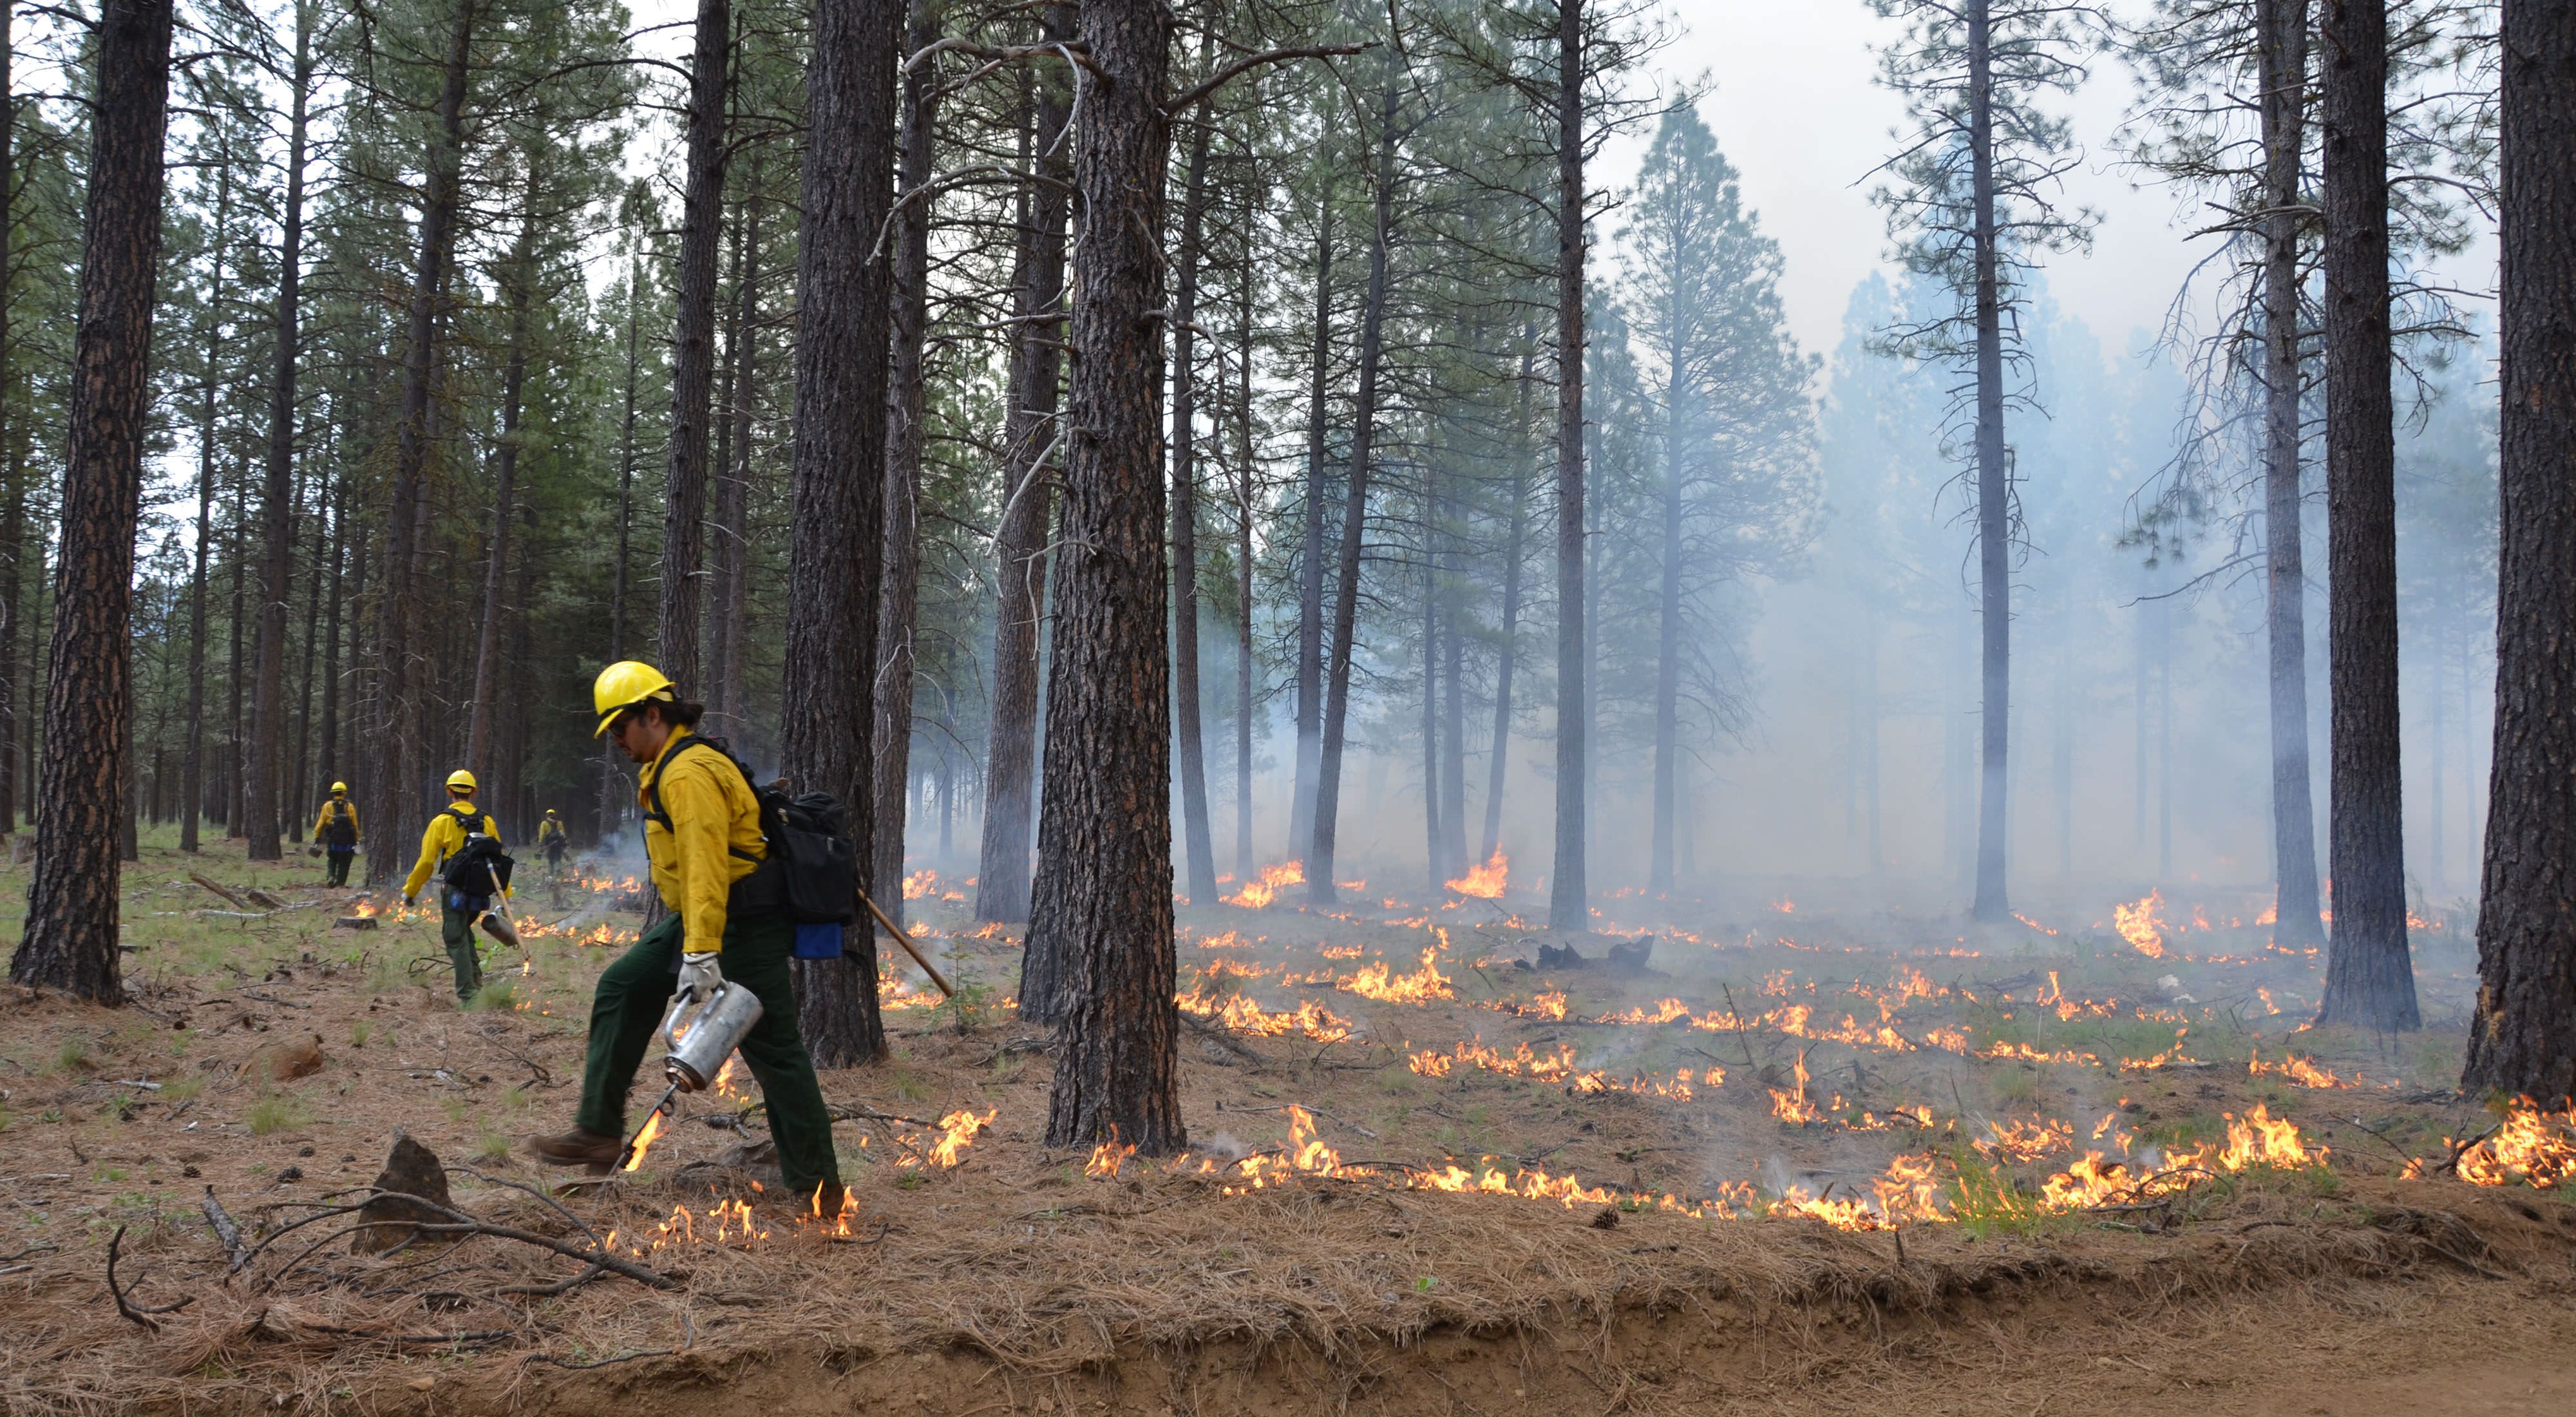 Staff in safety gear with flamethrowers spread out through a forest setting fire to the leaf litter.